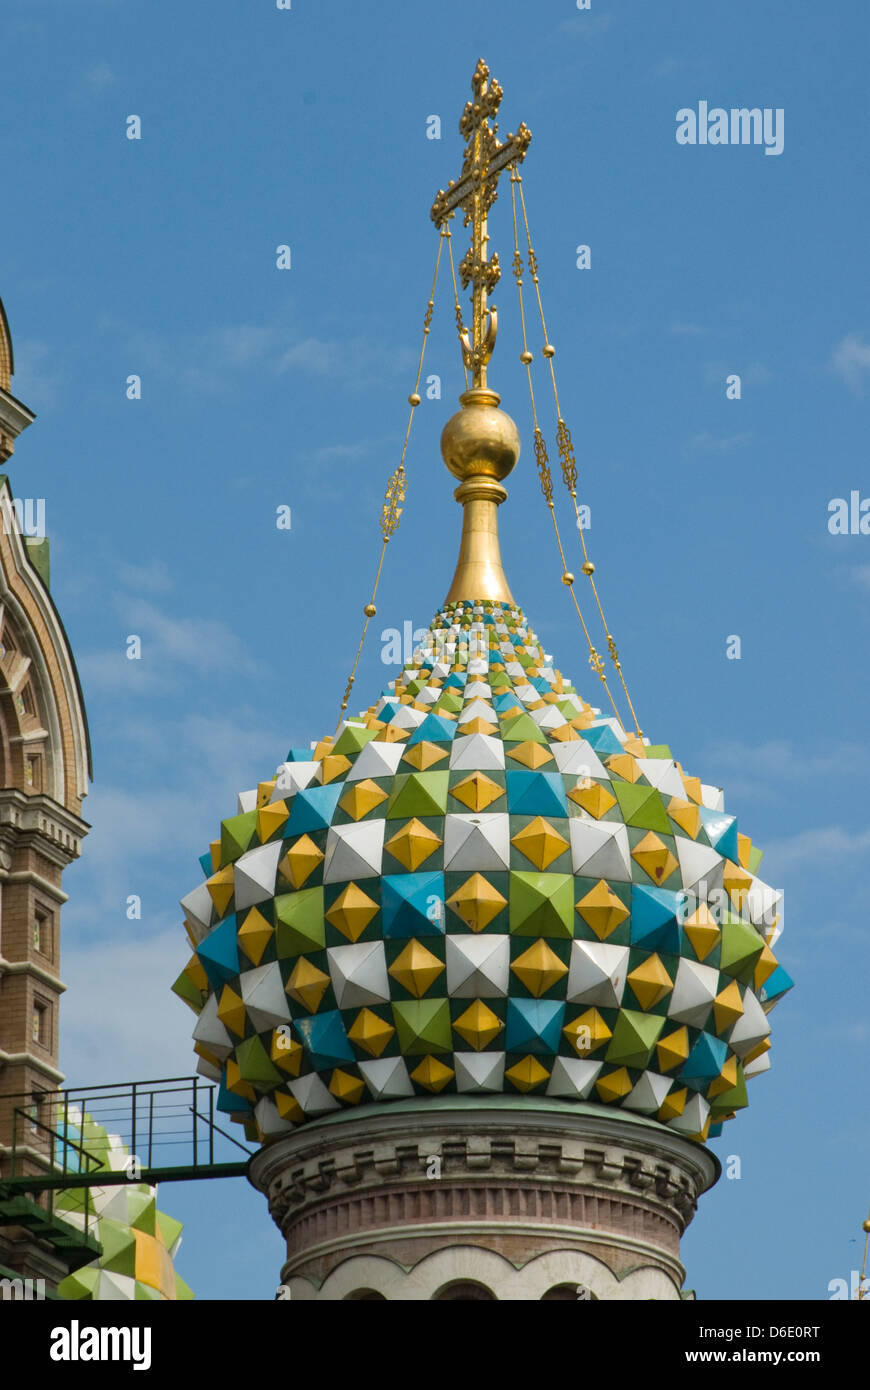 Dome on Church of Spilled Blood, St Petersburg, Russia Stock Photo